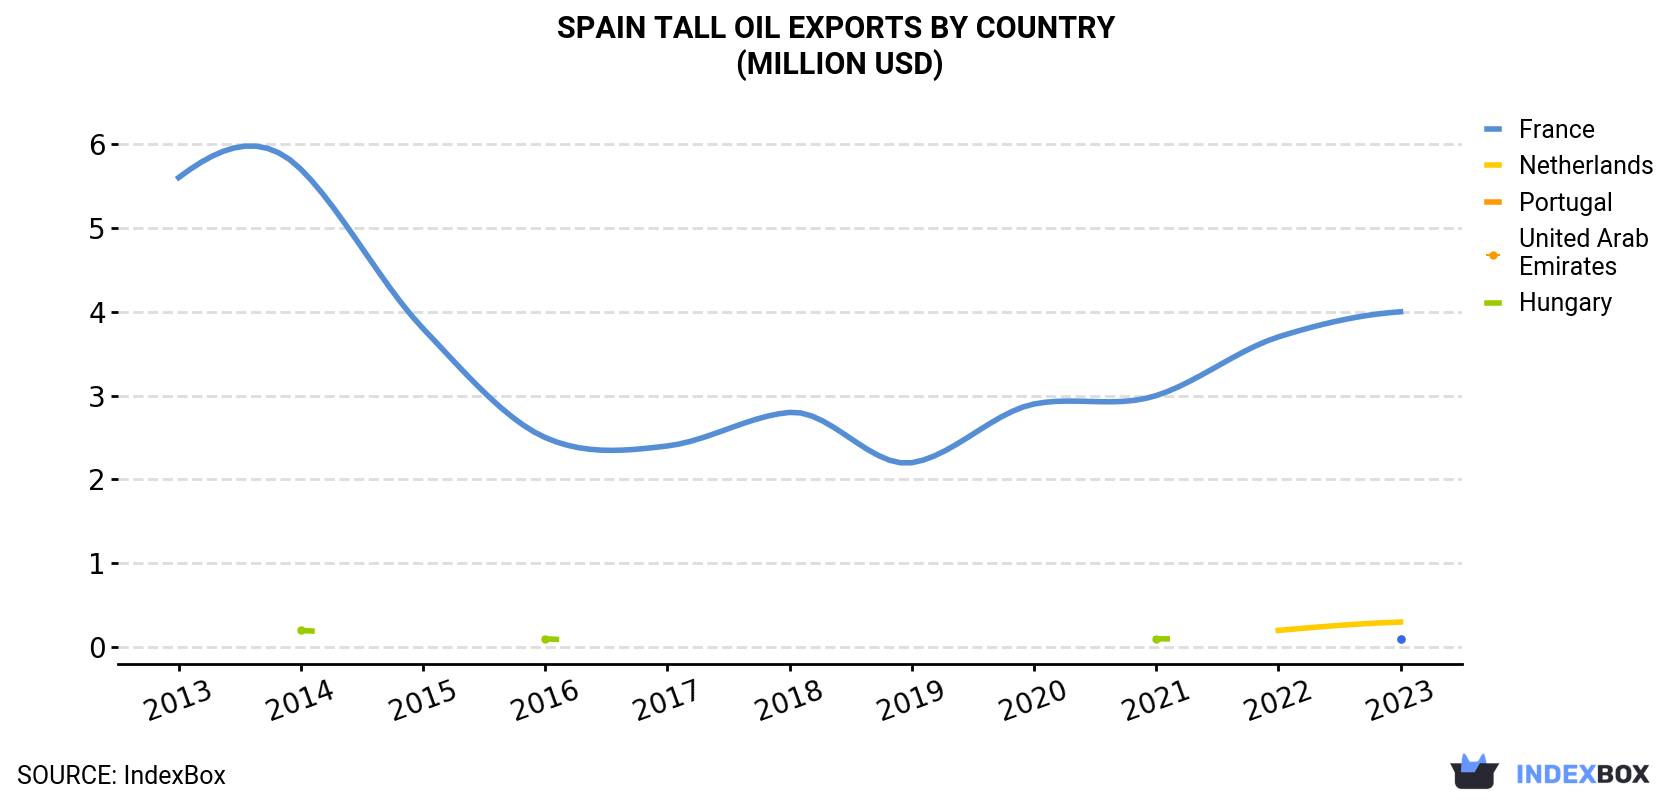 Spain Tall Oil Exports By Country (Million USD)